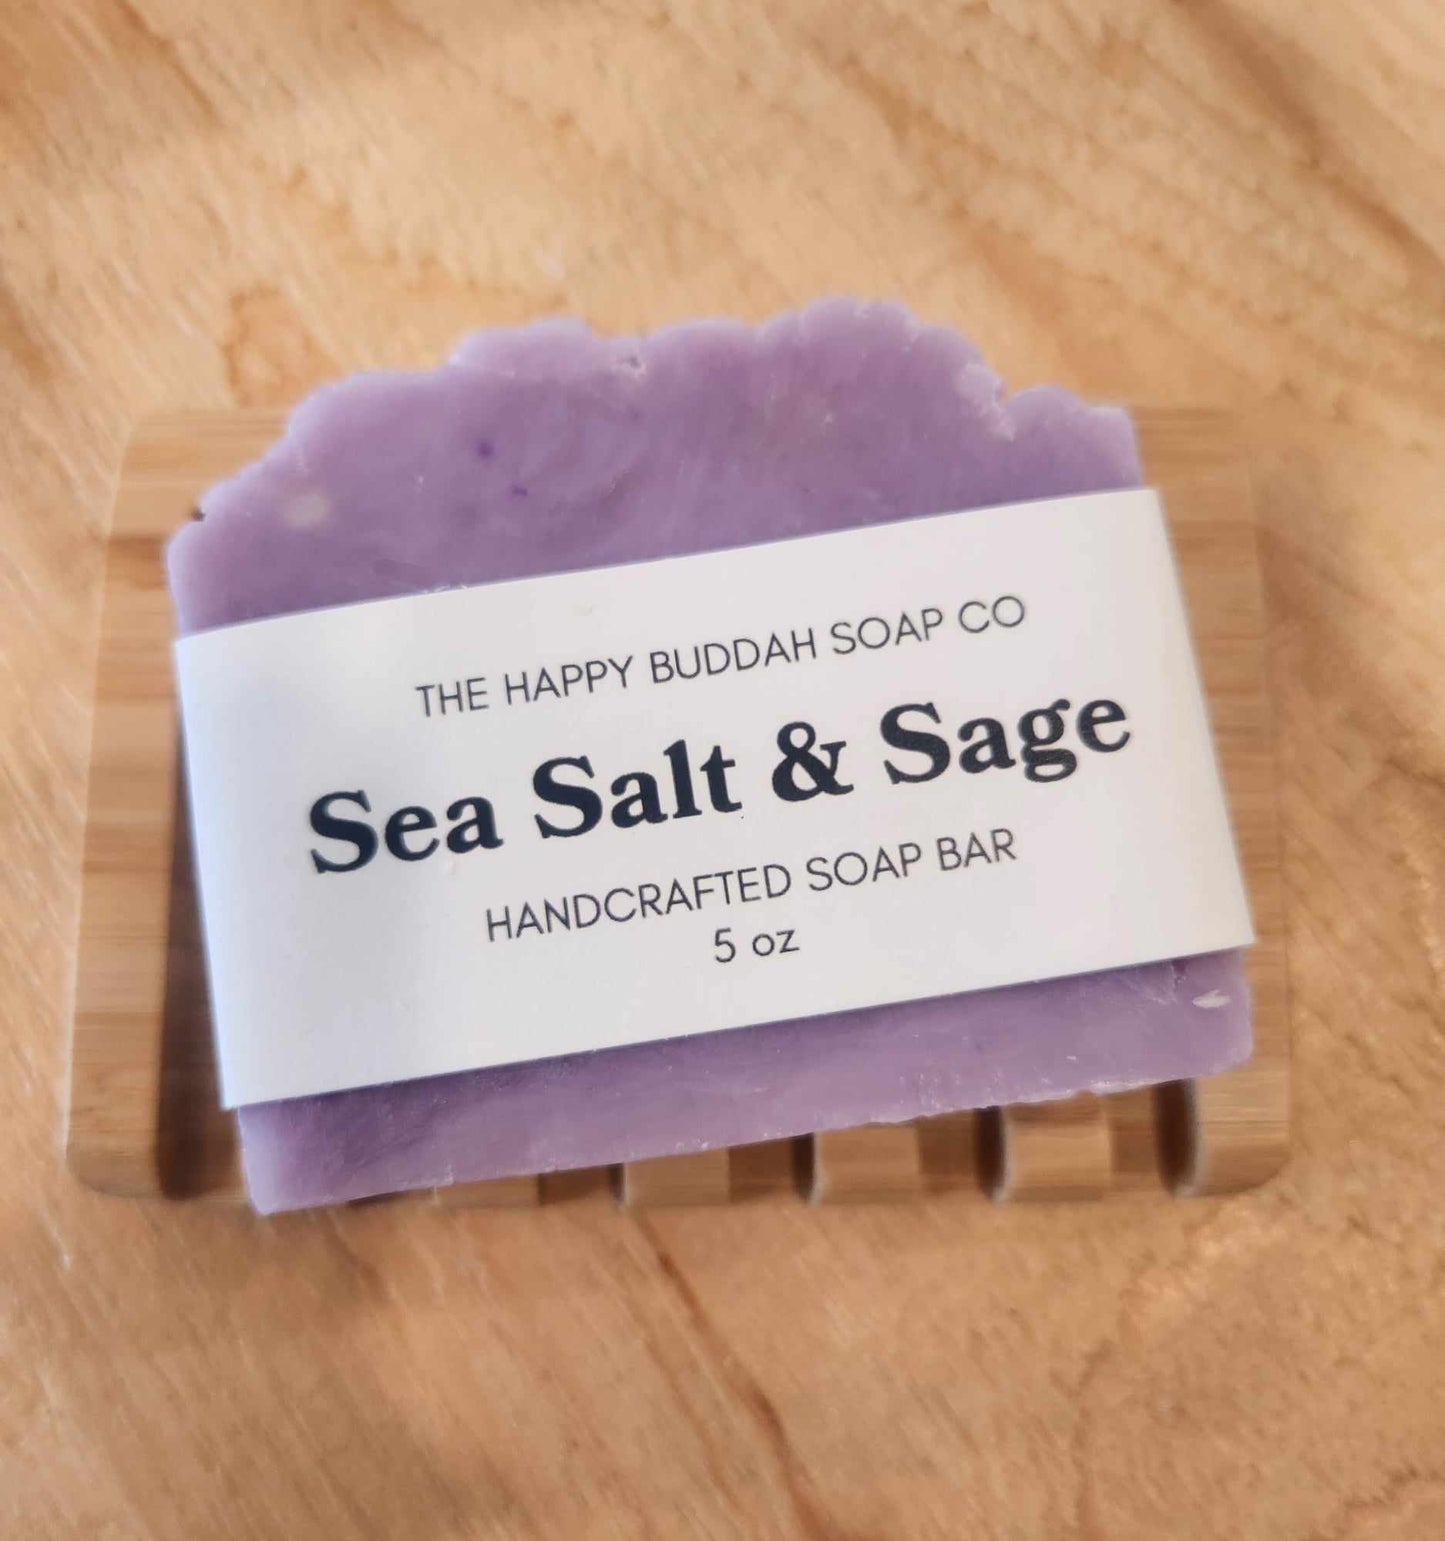 HANDCRAFTED SOAP BARS